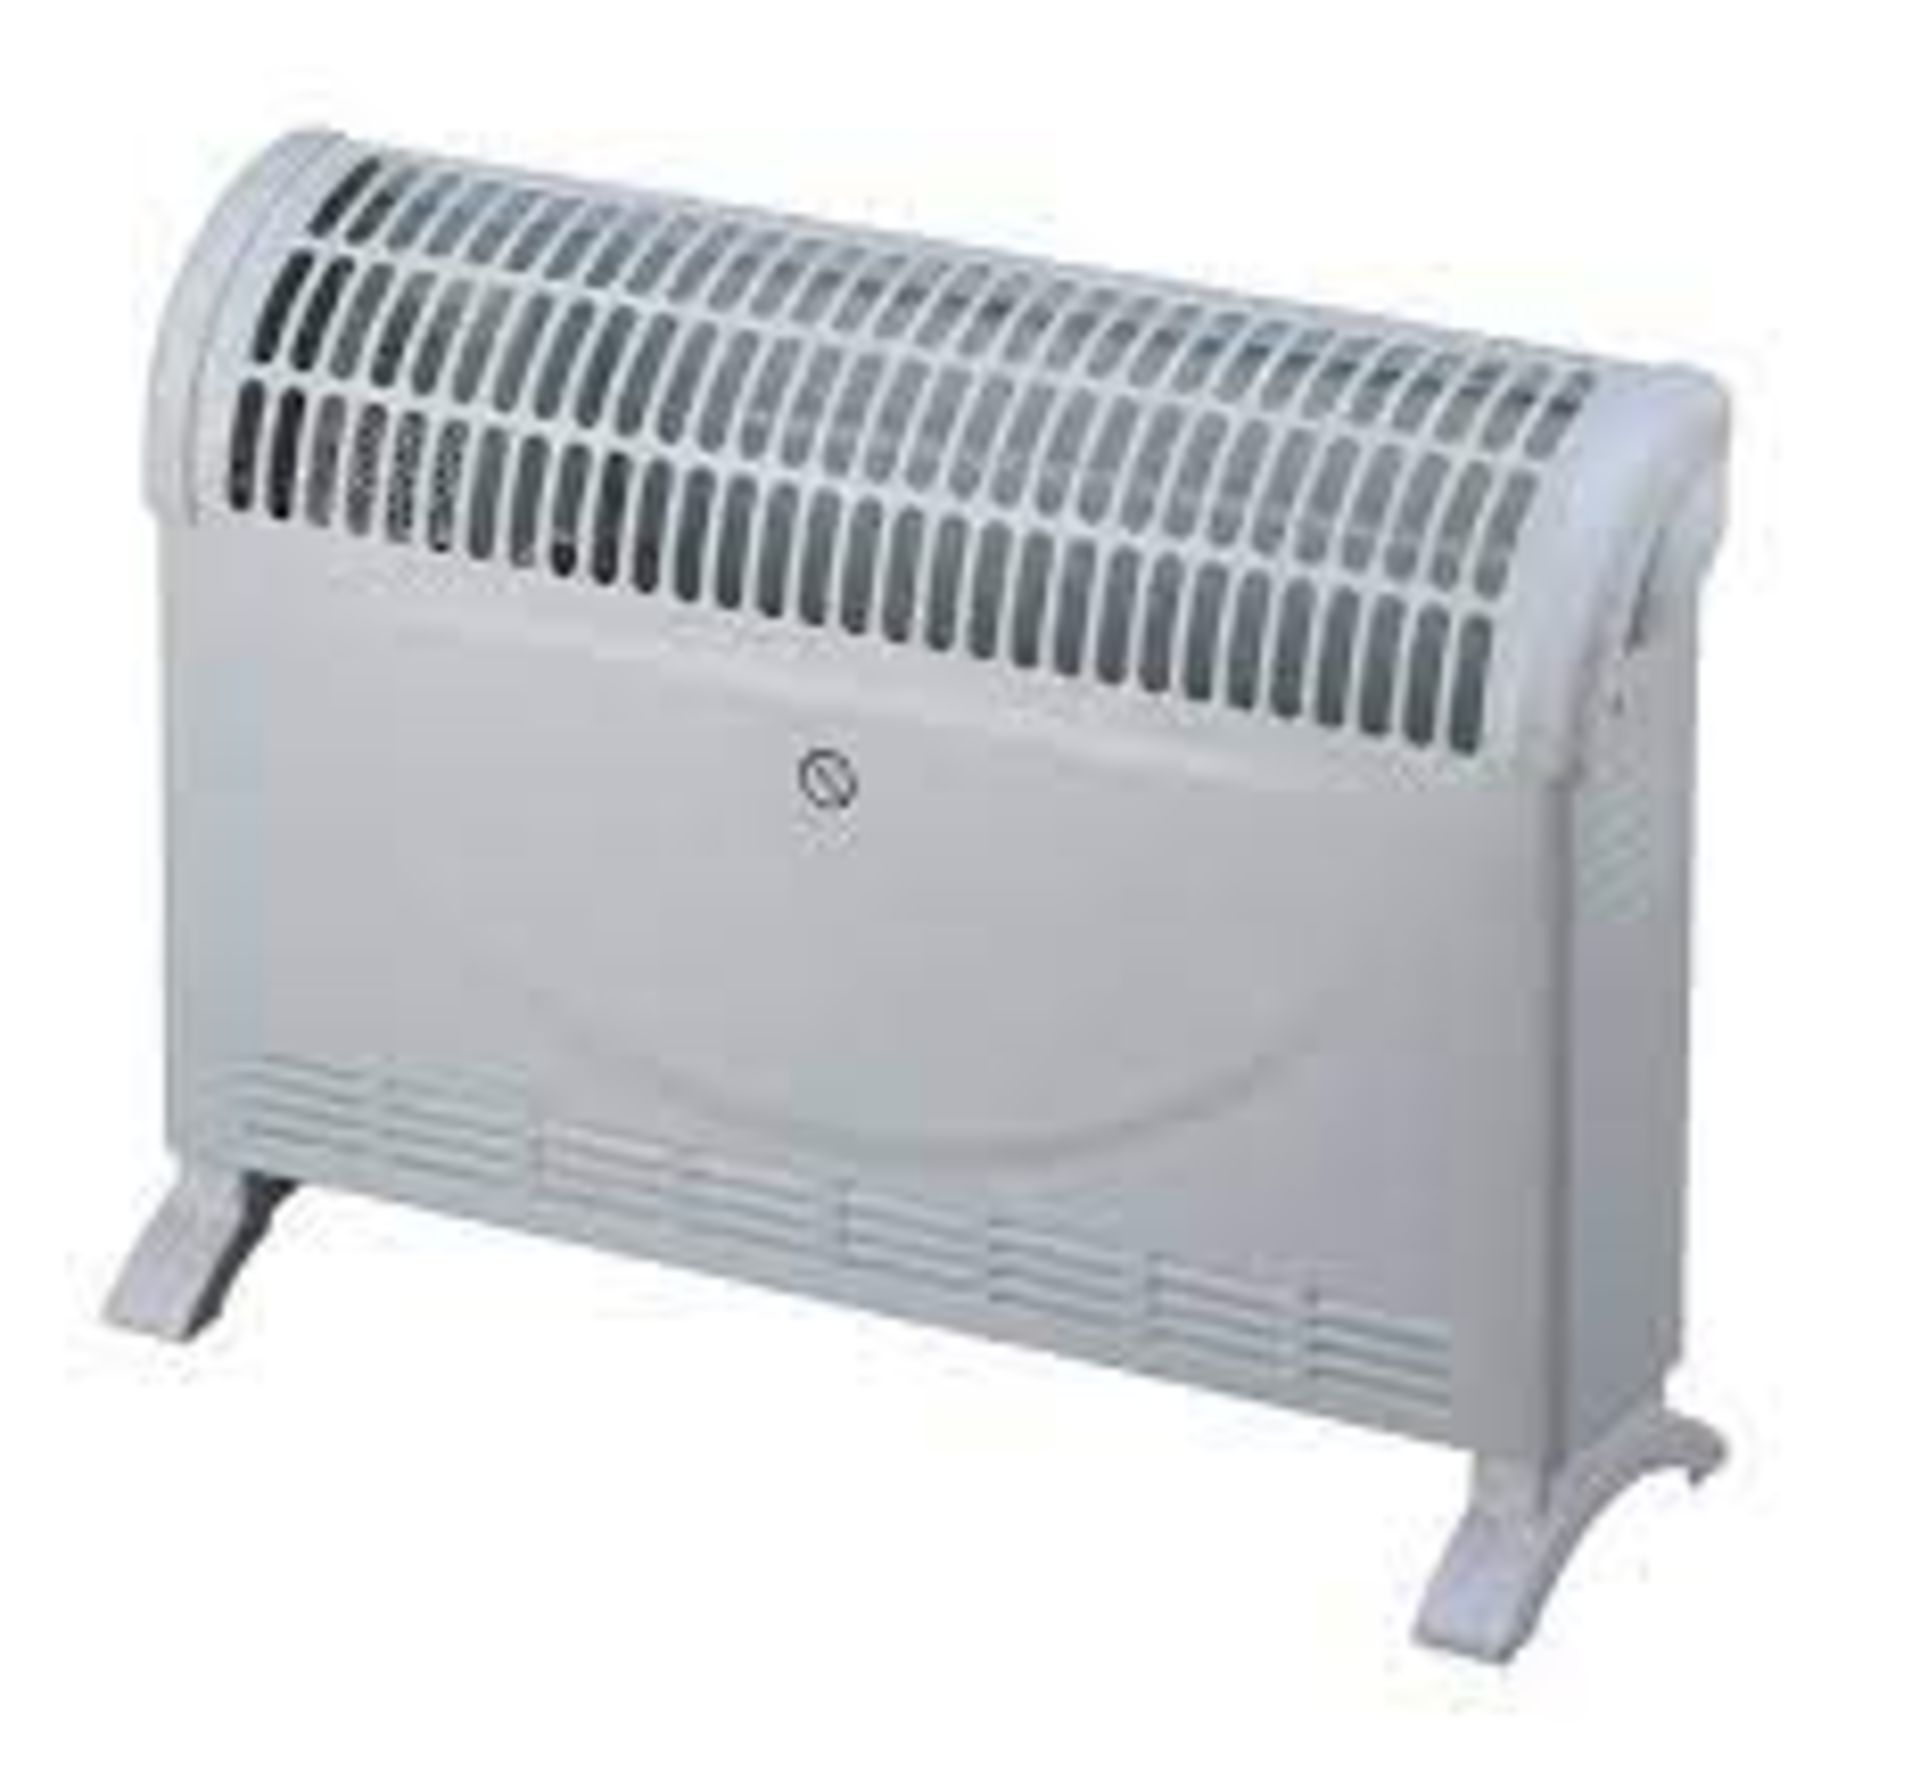 Trade lot 8 x 2000W White Convector heater. -ER51. Keep warm and cosy with this 2000W freestanding